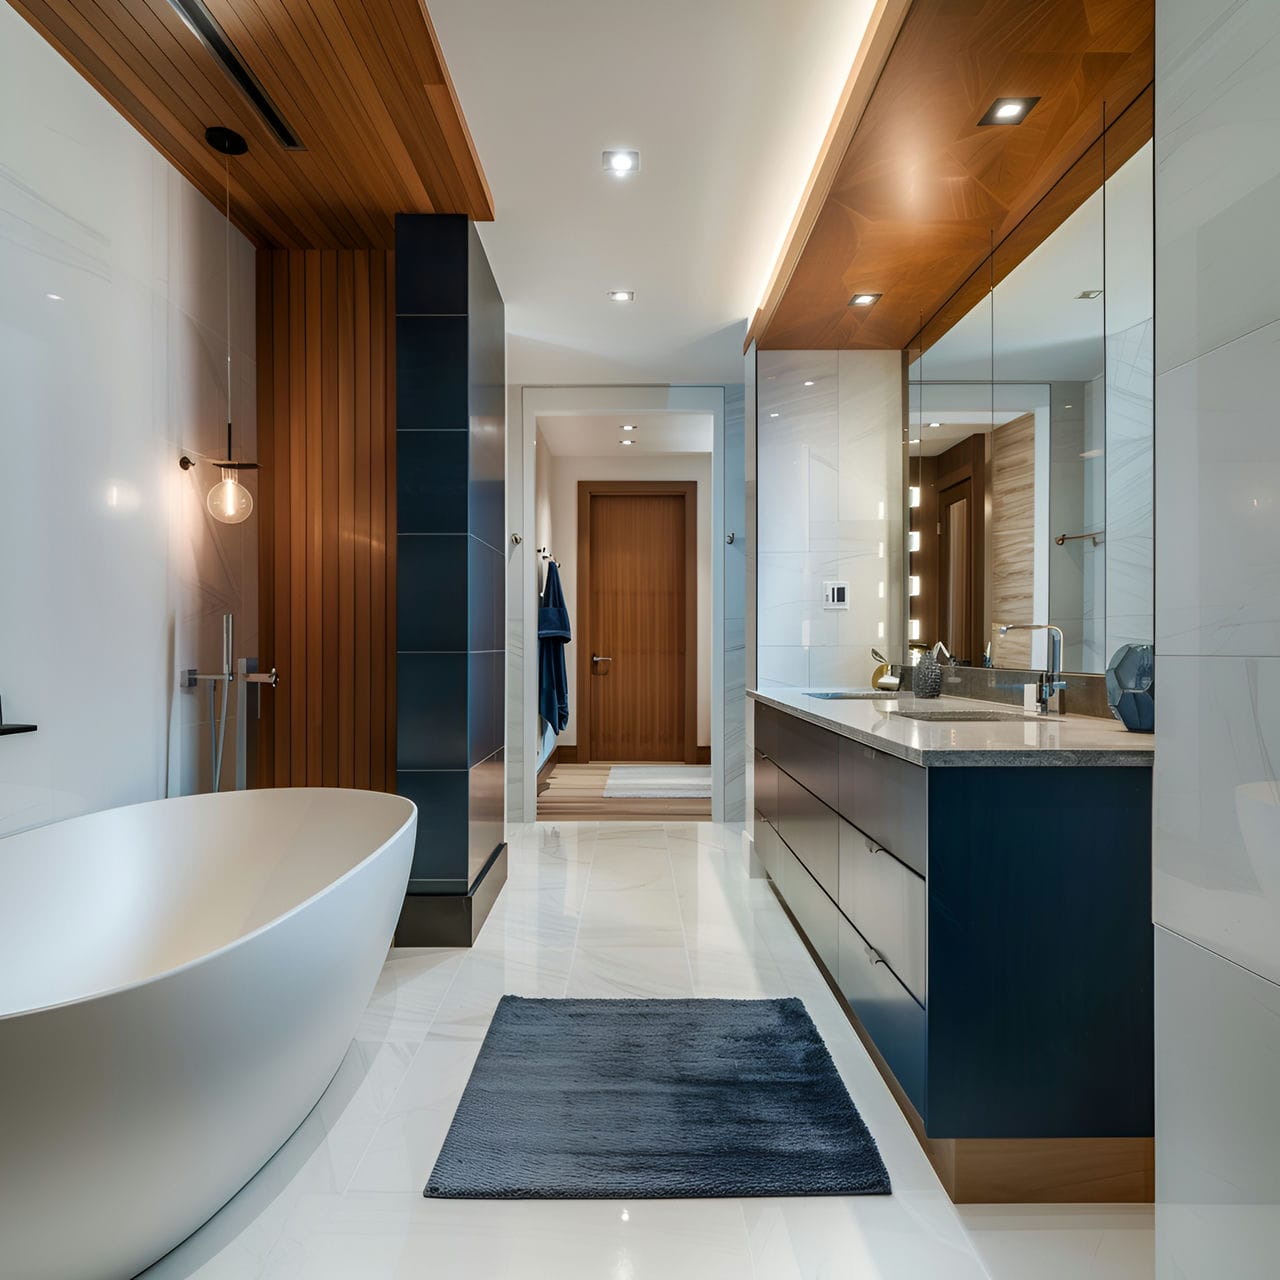 Master bathroom: size, functionality, uses, furniture and renovation